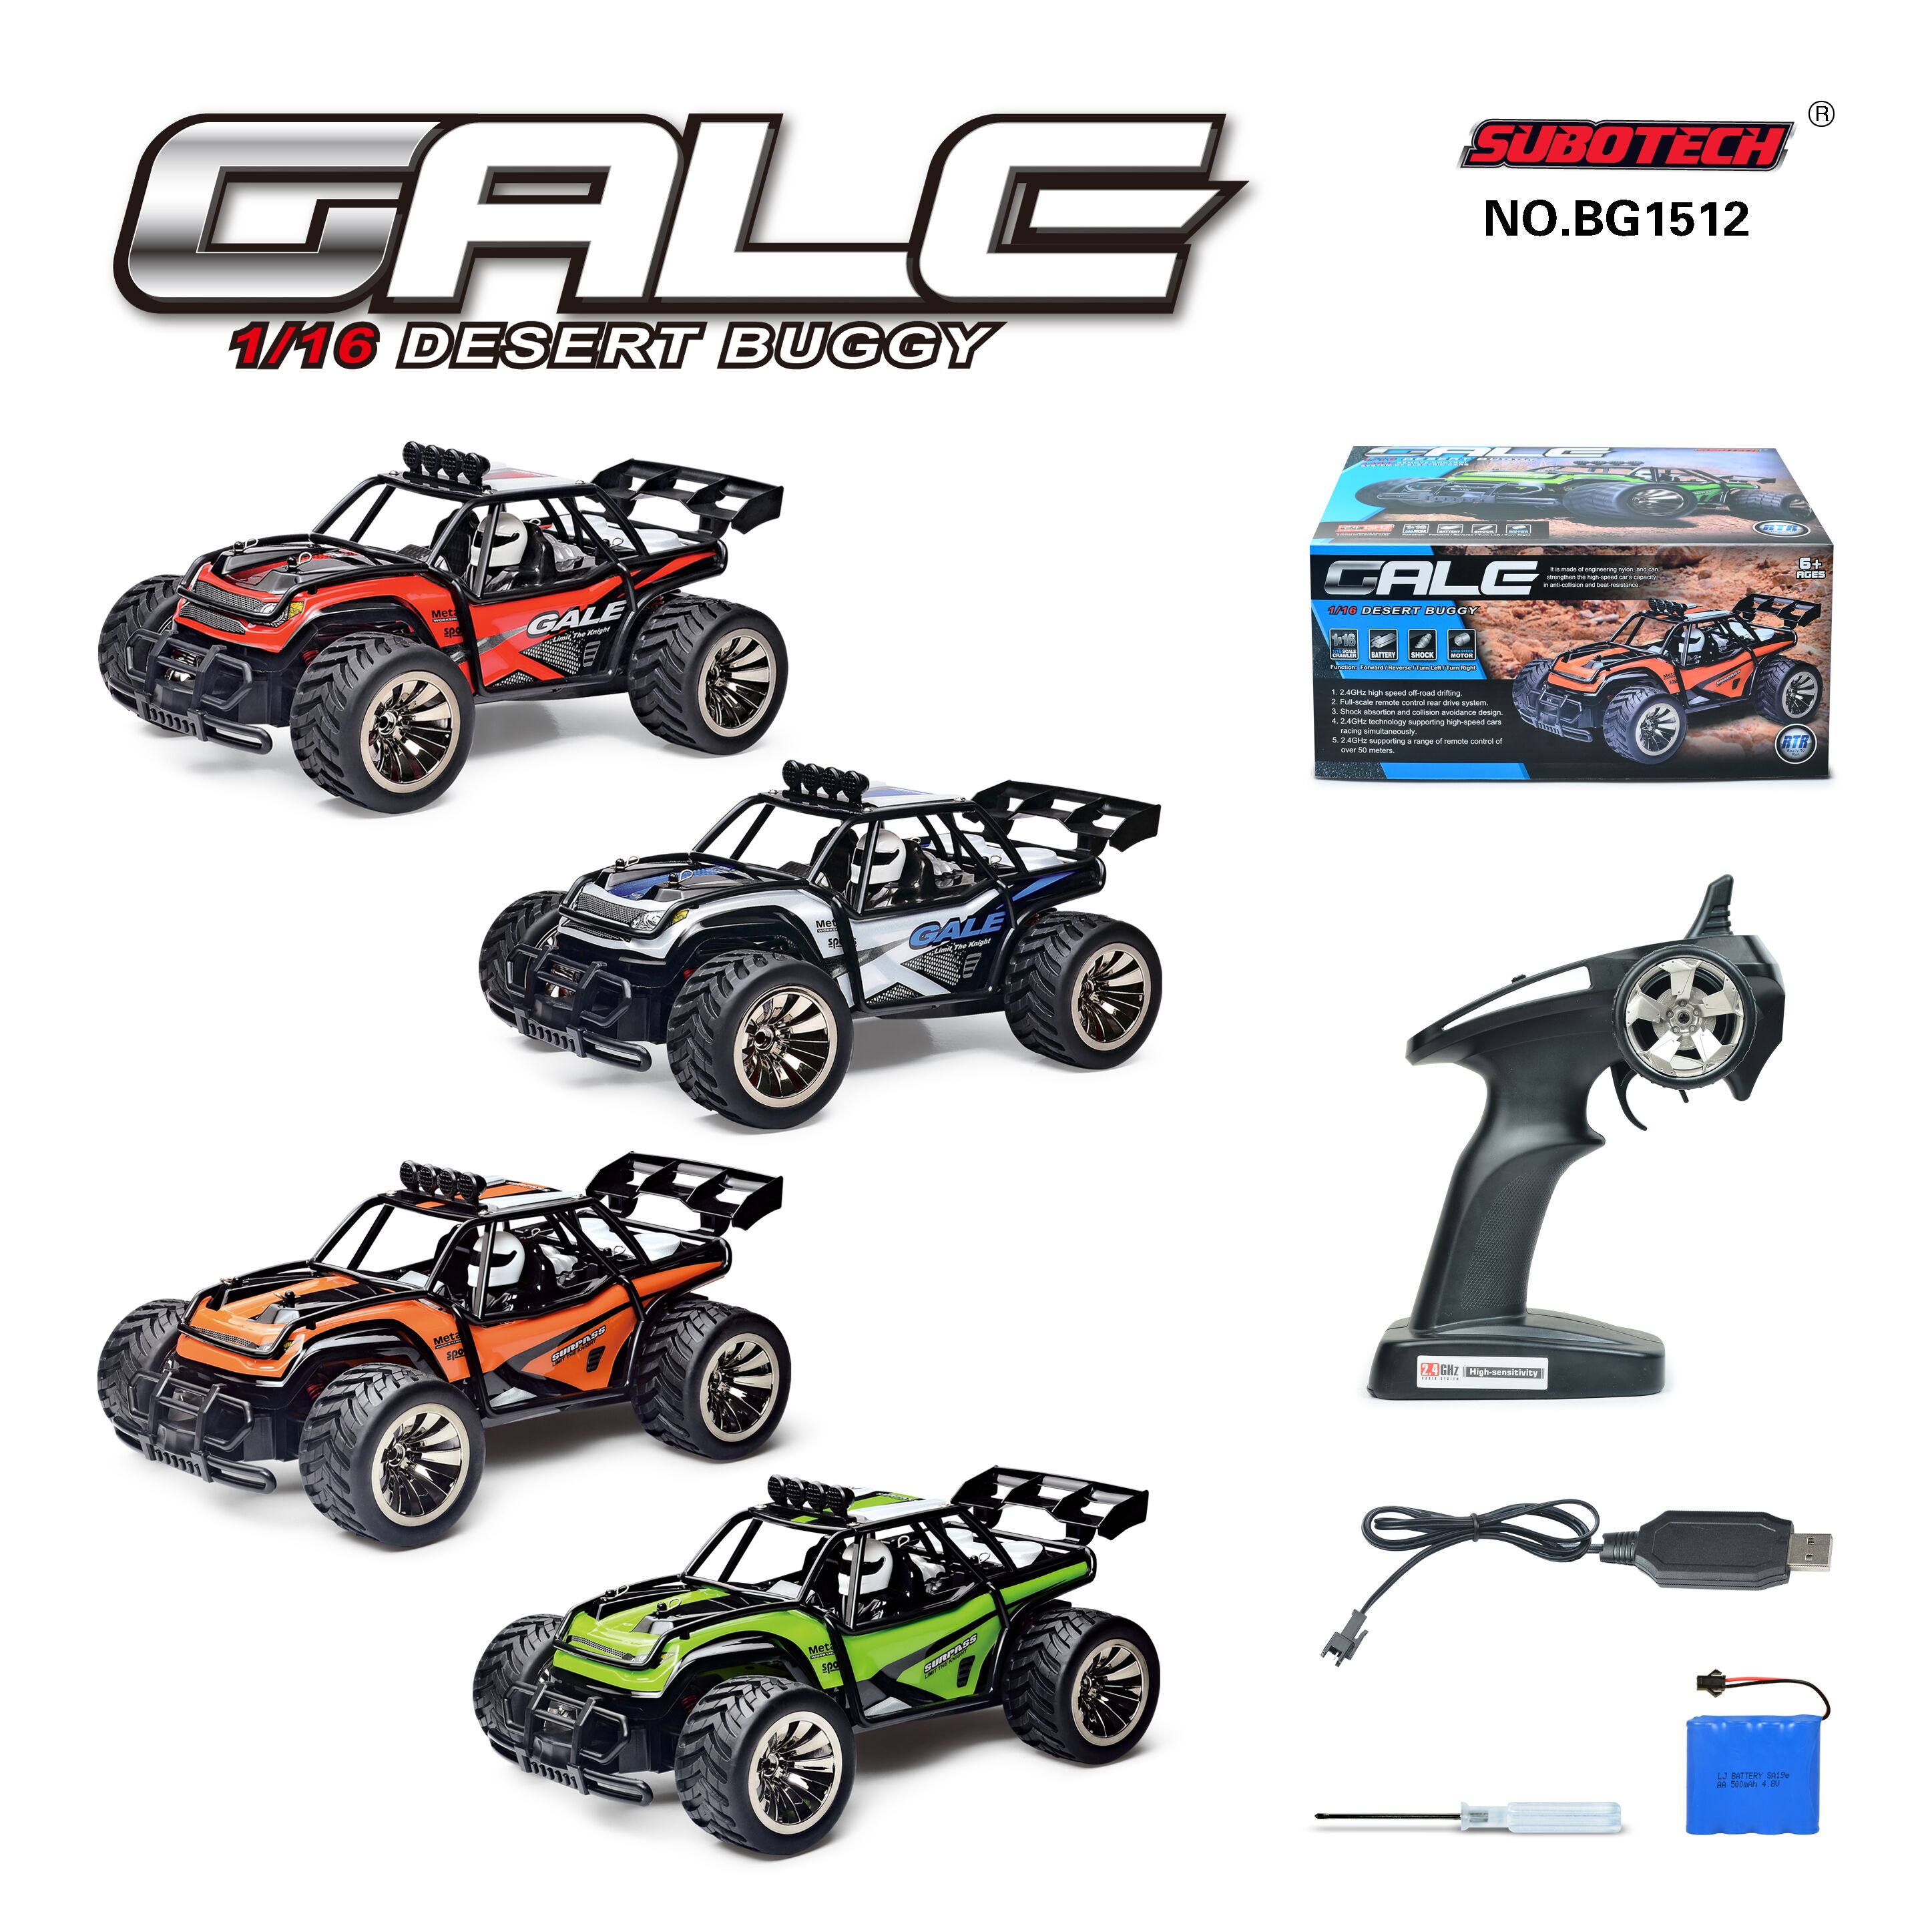 1/10,1/12,1/14,1/16 RTR IPX4 Off-Road Control Remote Control Factory